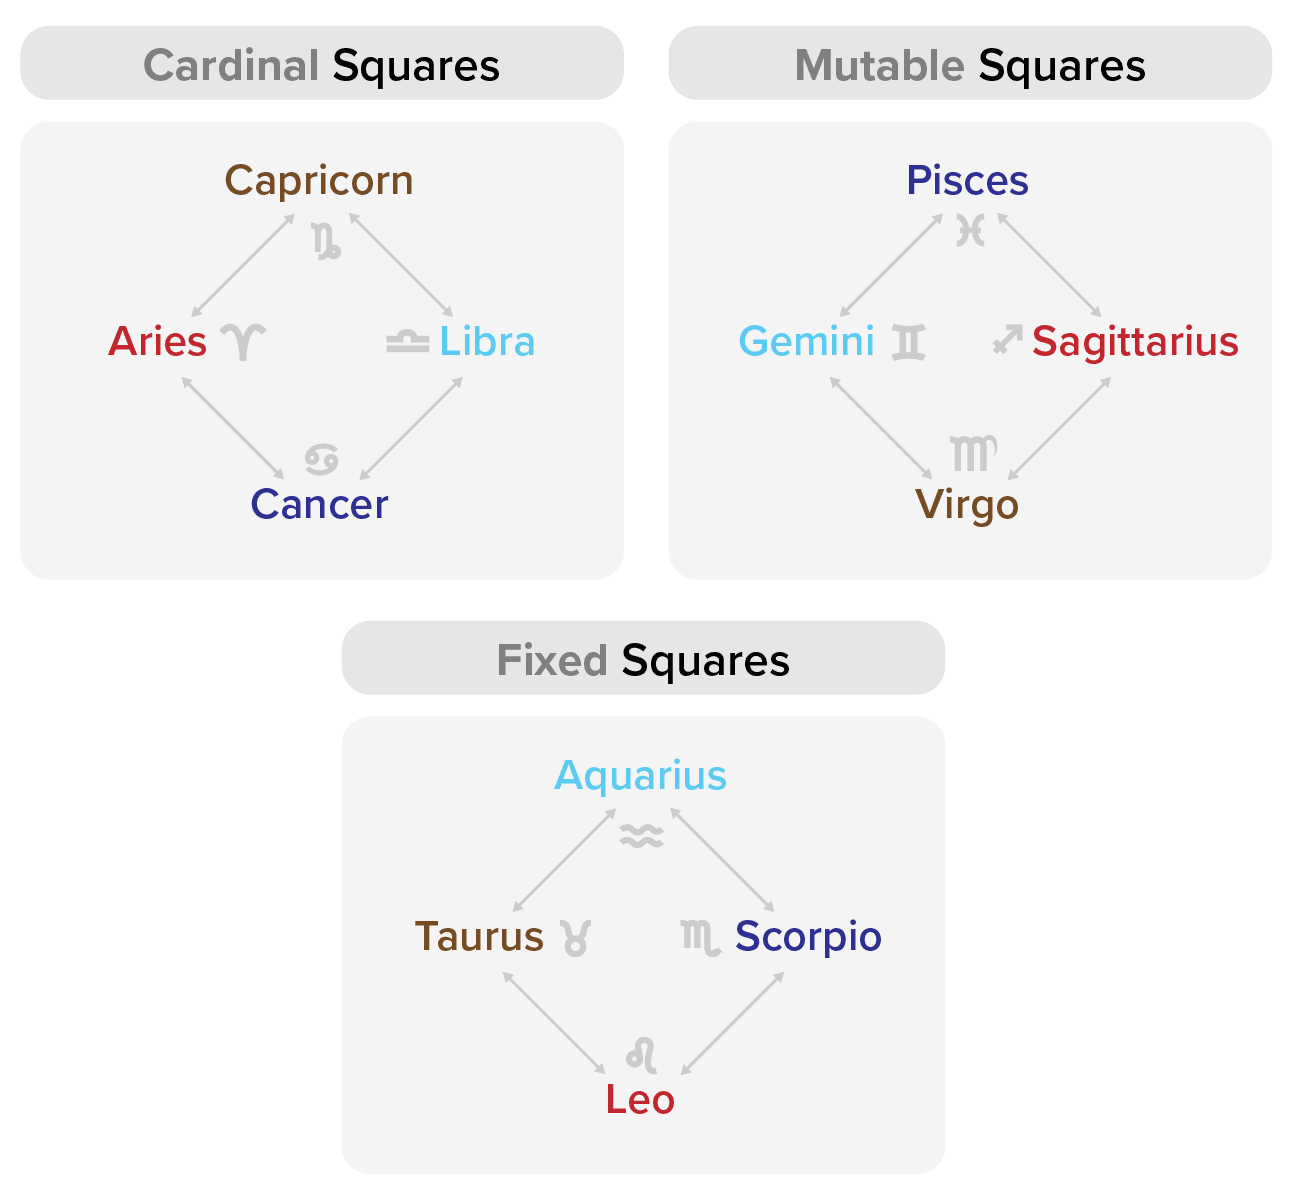 Cardinal, Mutable and Fixed Squares by Zodiac Sign in Synastry